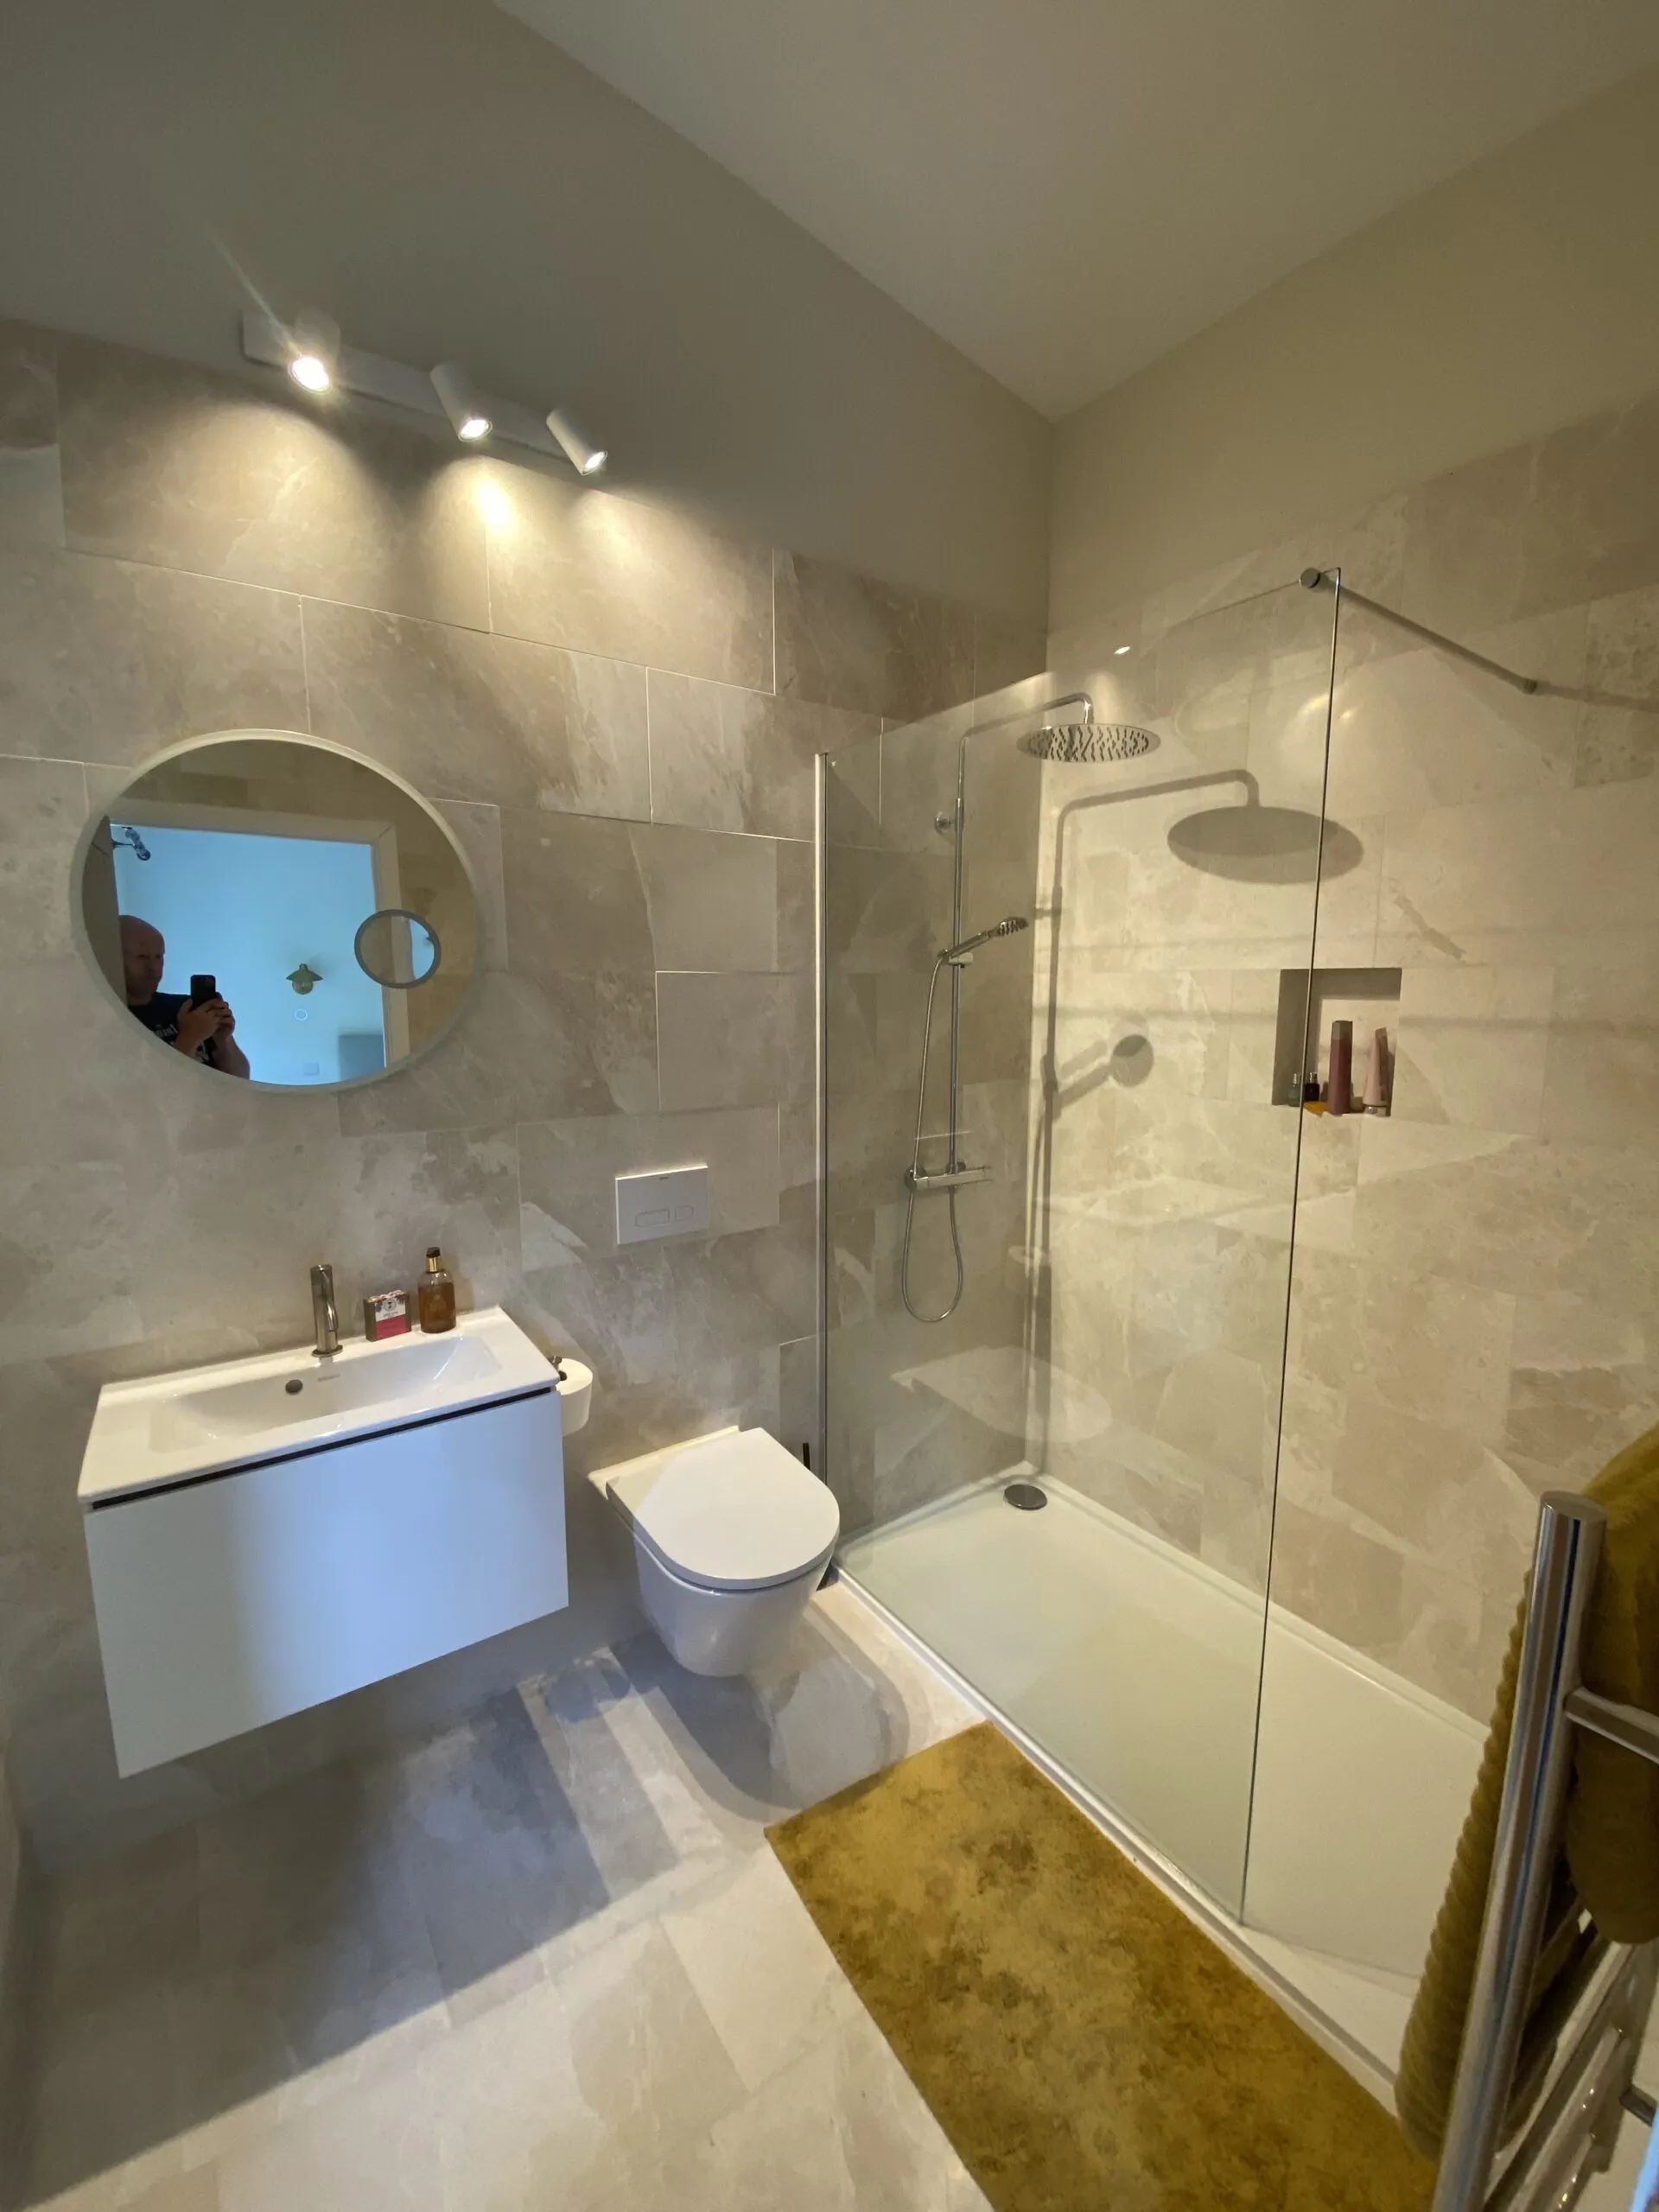 Large wall shower, concealed shower valve and wall mounted outlets. White wall hung vanity unit and toilet with concealed cistern.